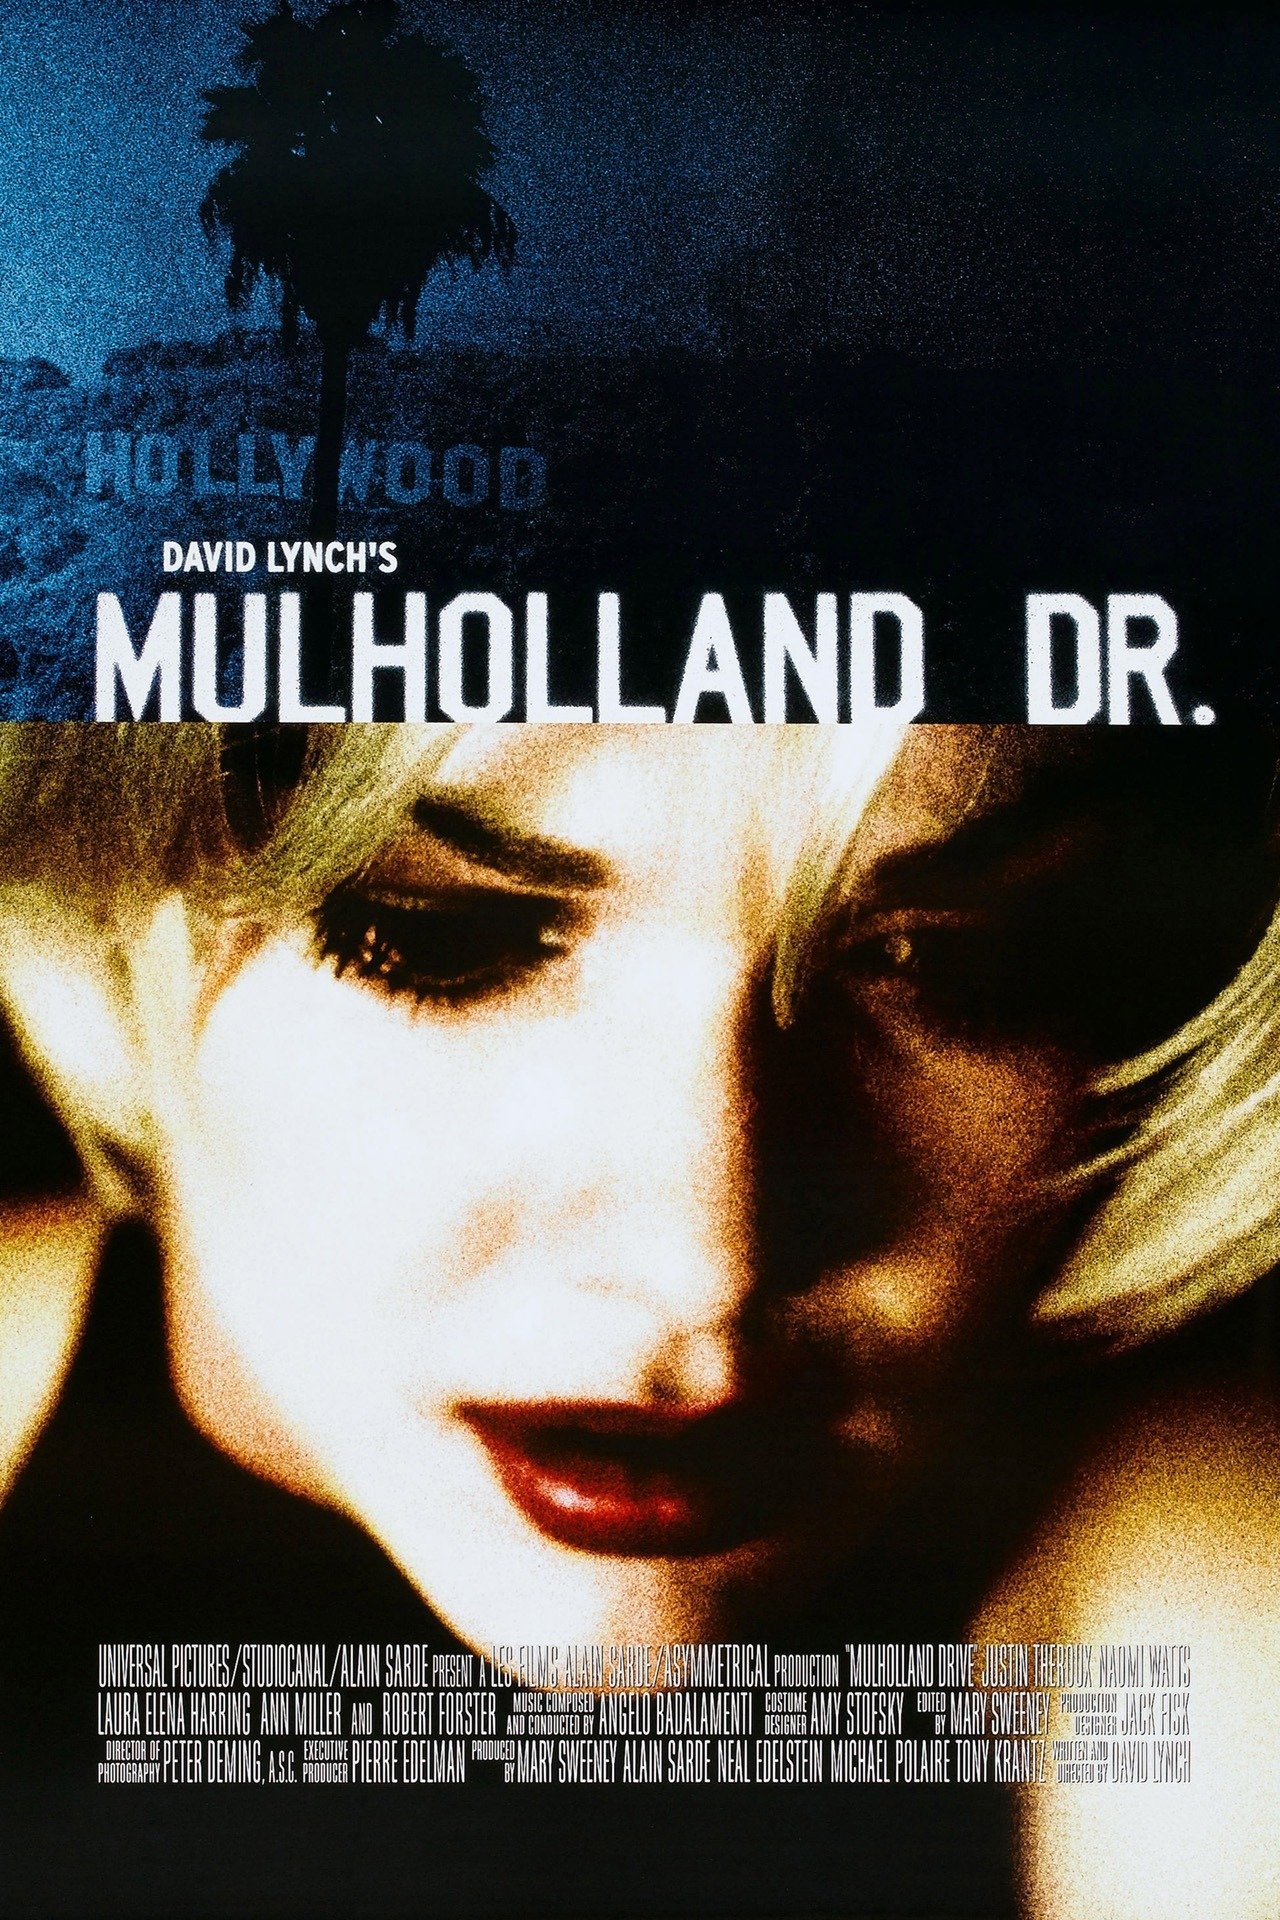 deb wiggs recommends Mulholland Drive Movie Online